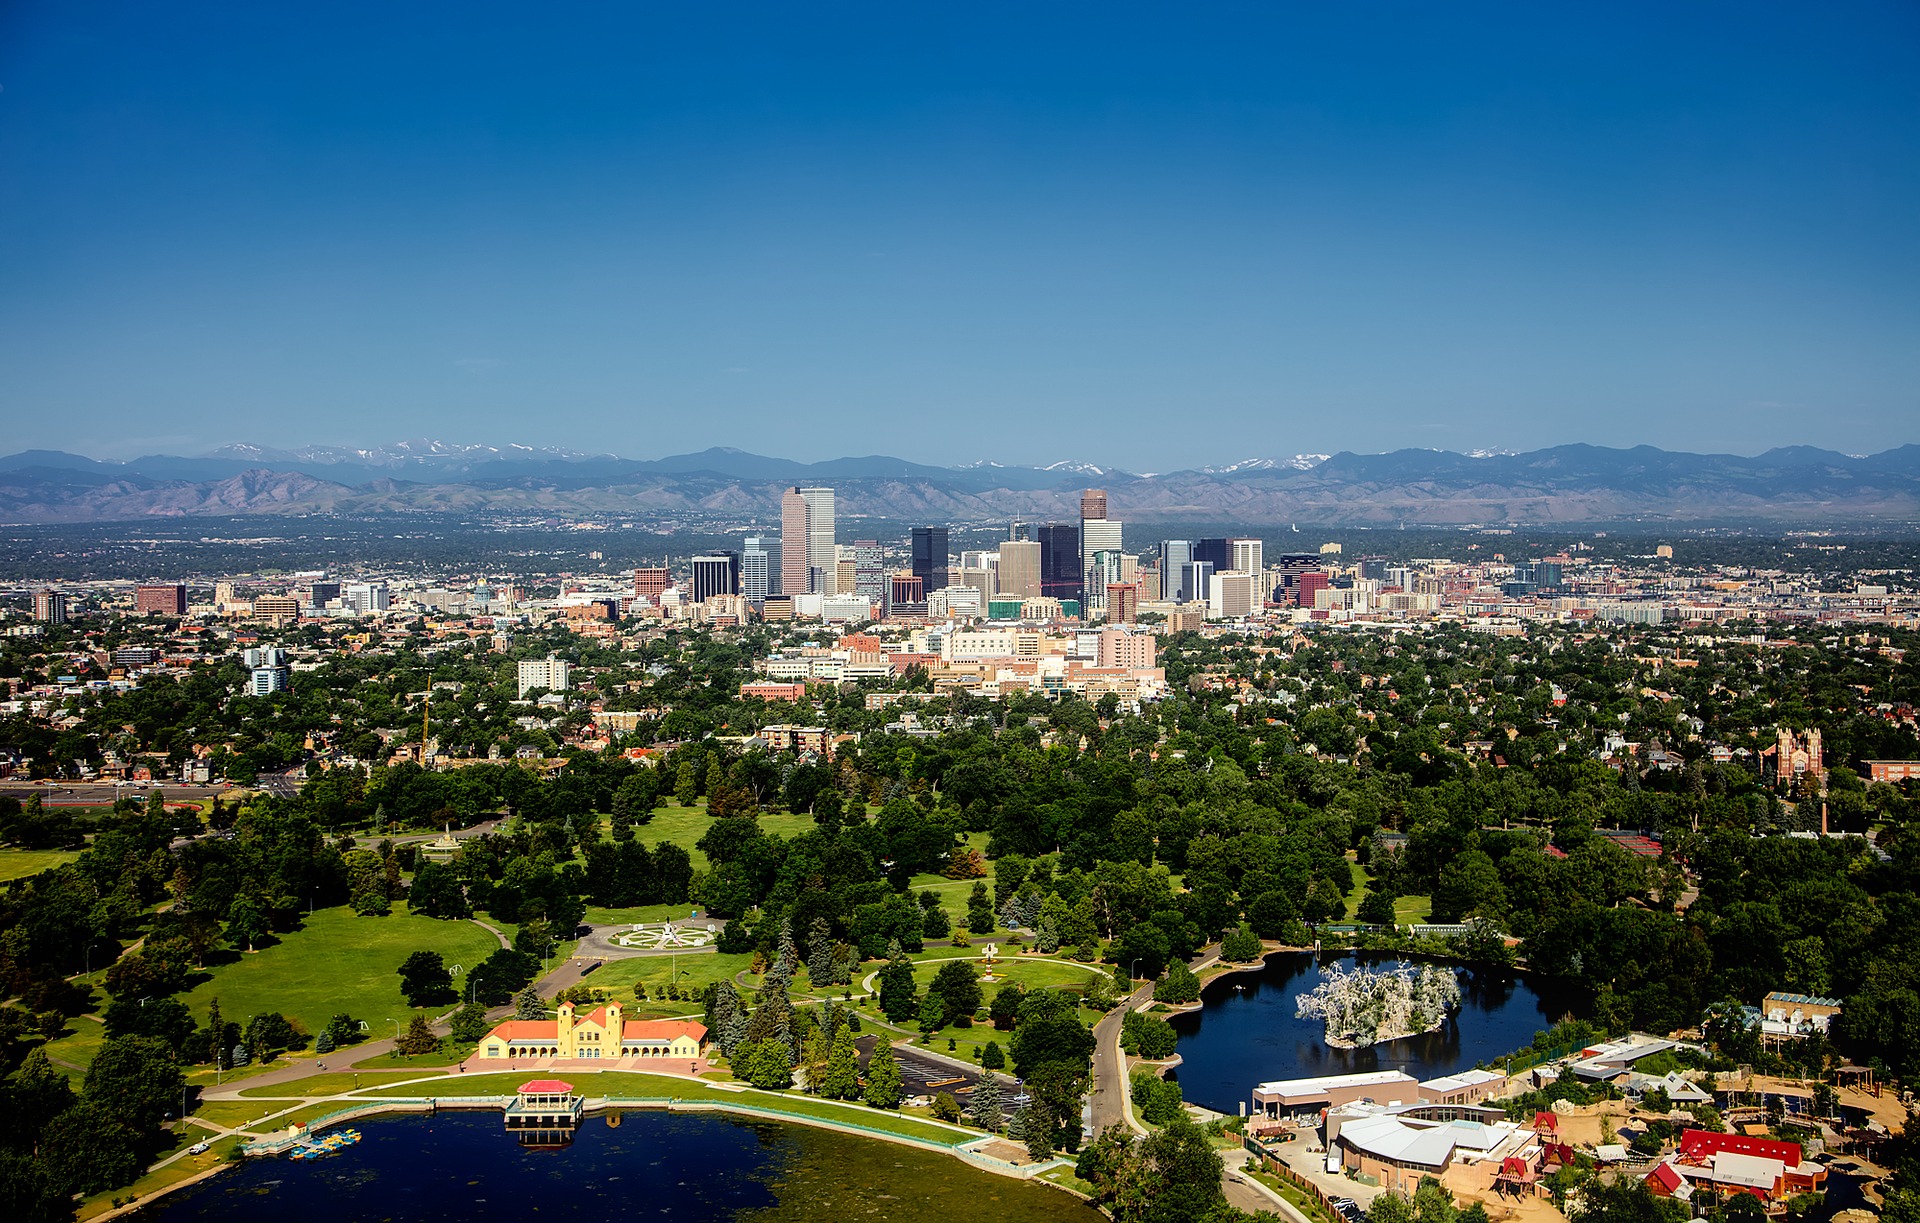 denver skyline and downtown area with lakes in the foreground